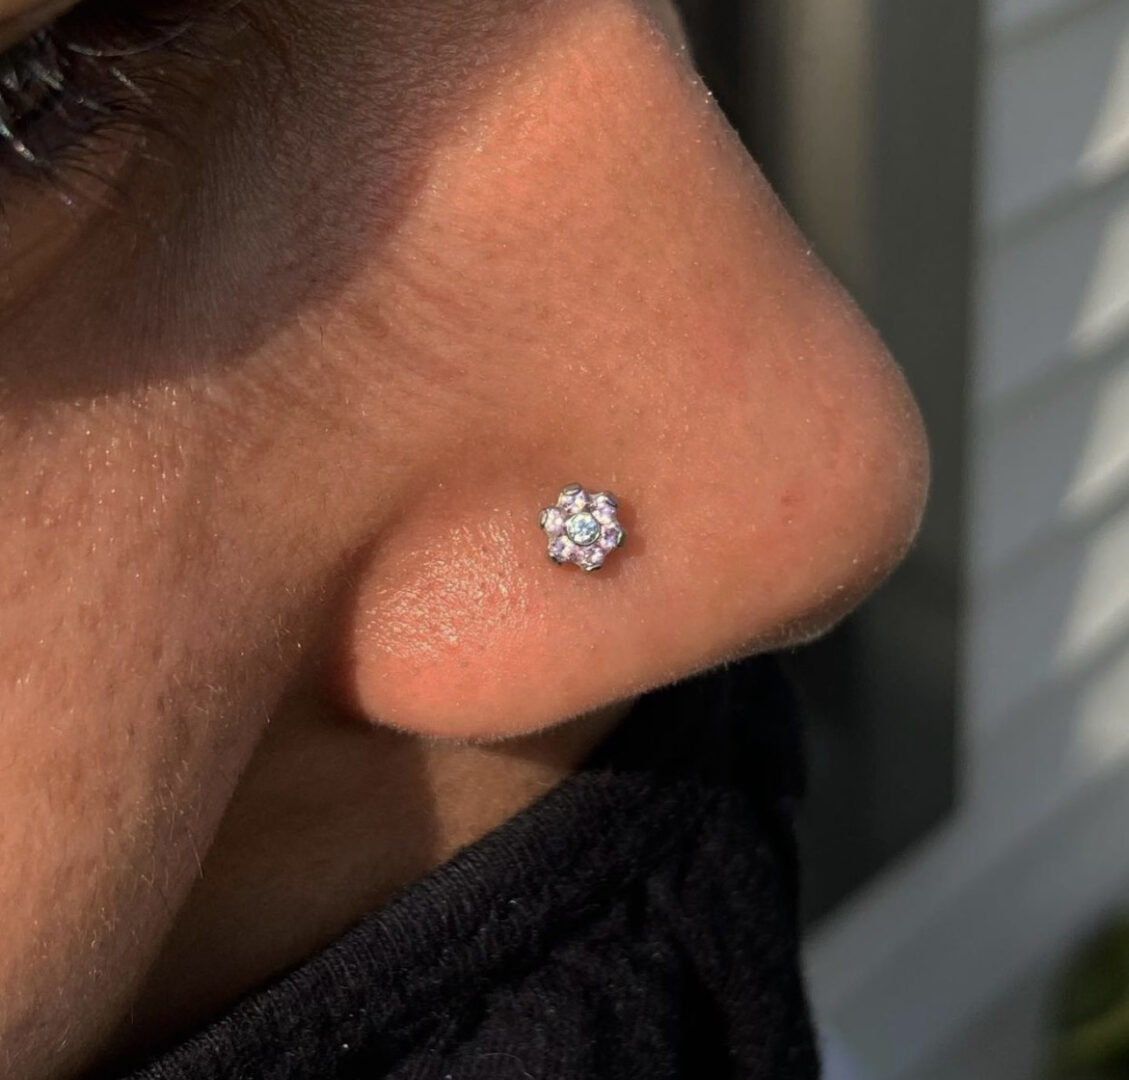 A person with their nose piercing and wearing a black jacket